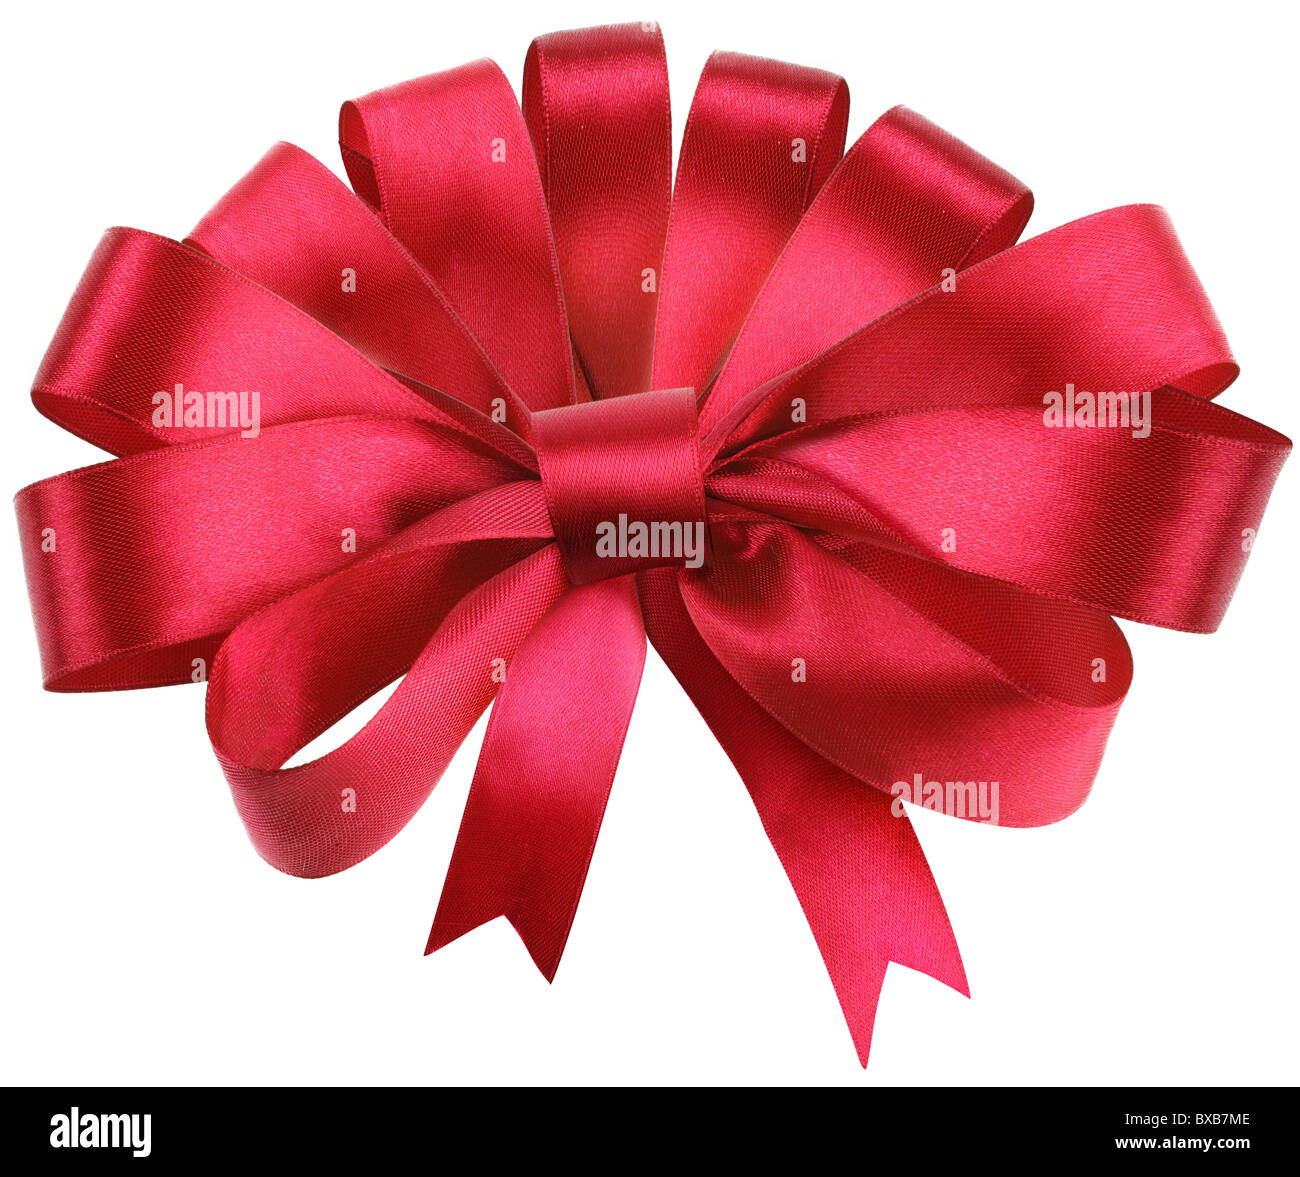 Big red bow isolated on white background. Stock Photo